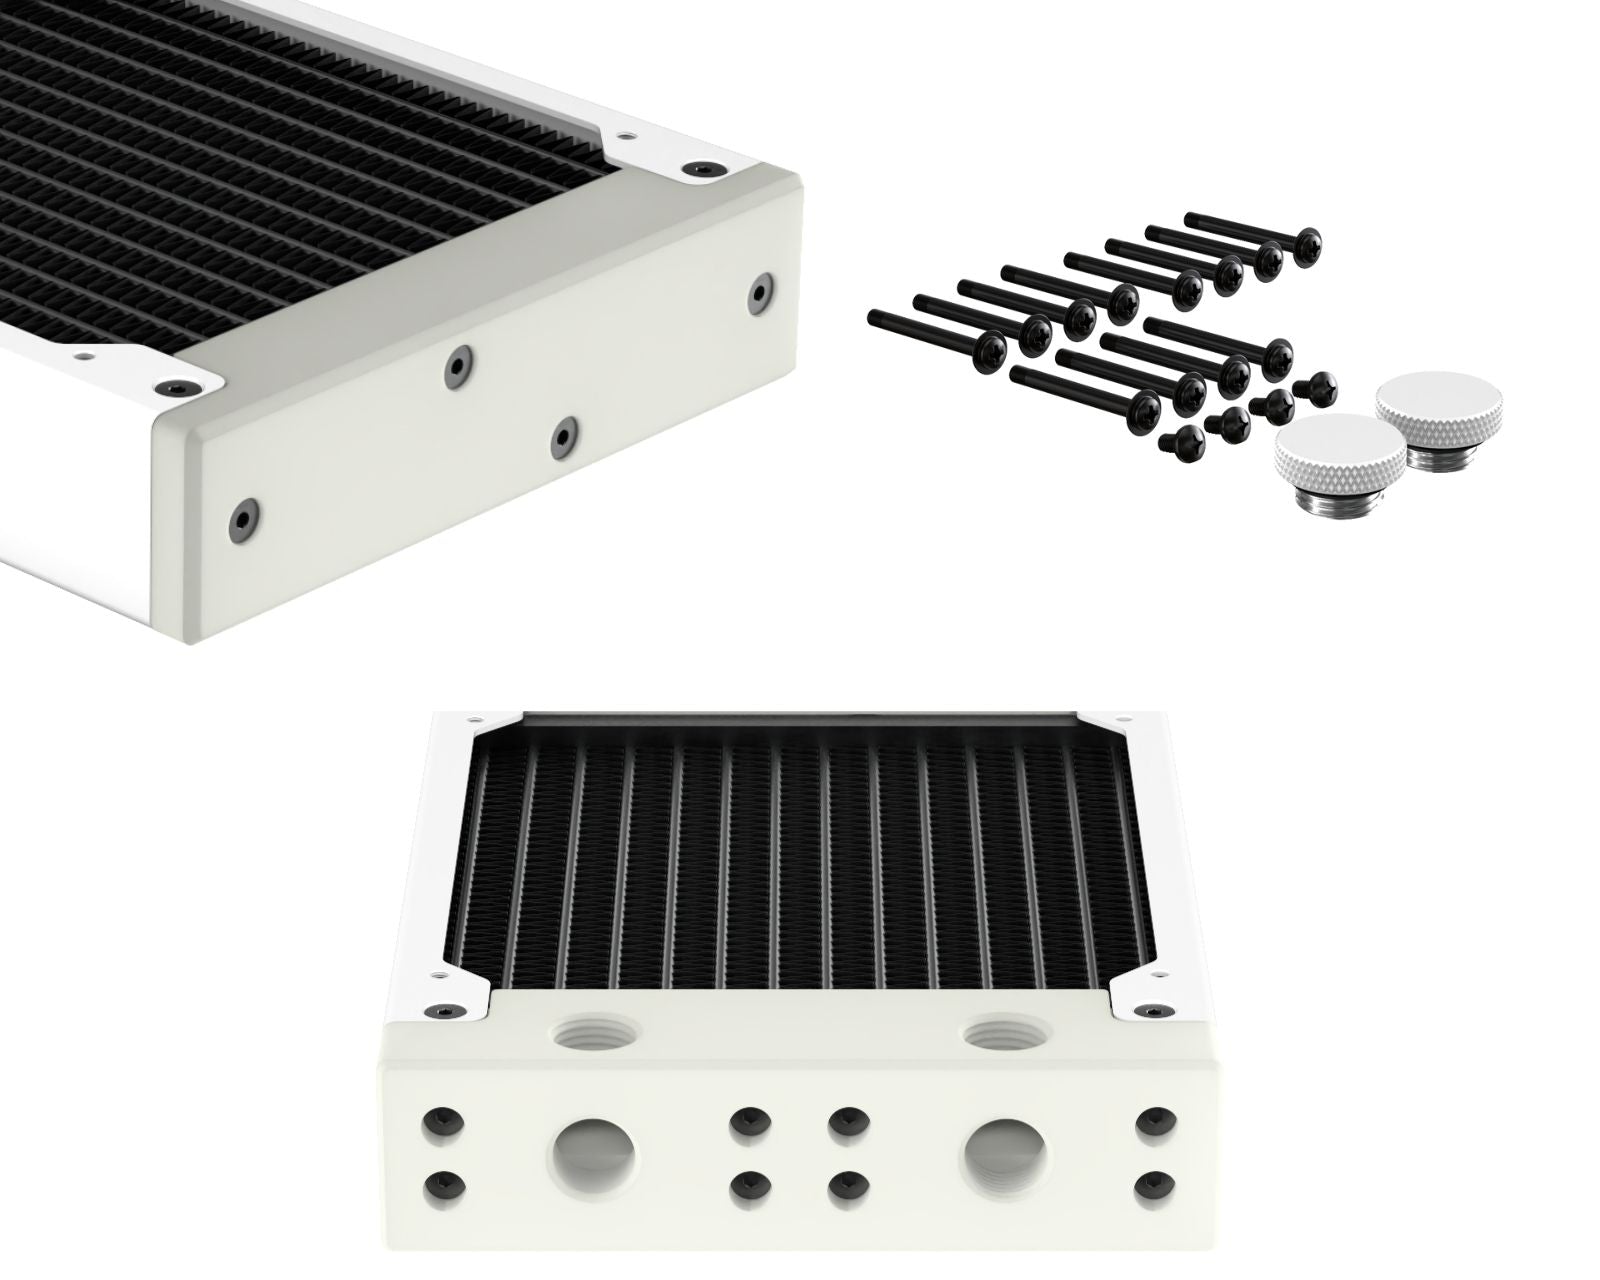 PrimoChill 360SL (30mm) EXIMO Modular Radiator, White POM, 3x120mm, Triple Fan (R-SL-W36) Available in 20+ Colors, Assembled in USA and Custom Watercooling Loop Ready - Sky White